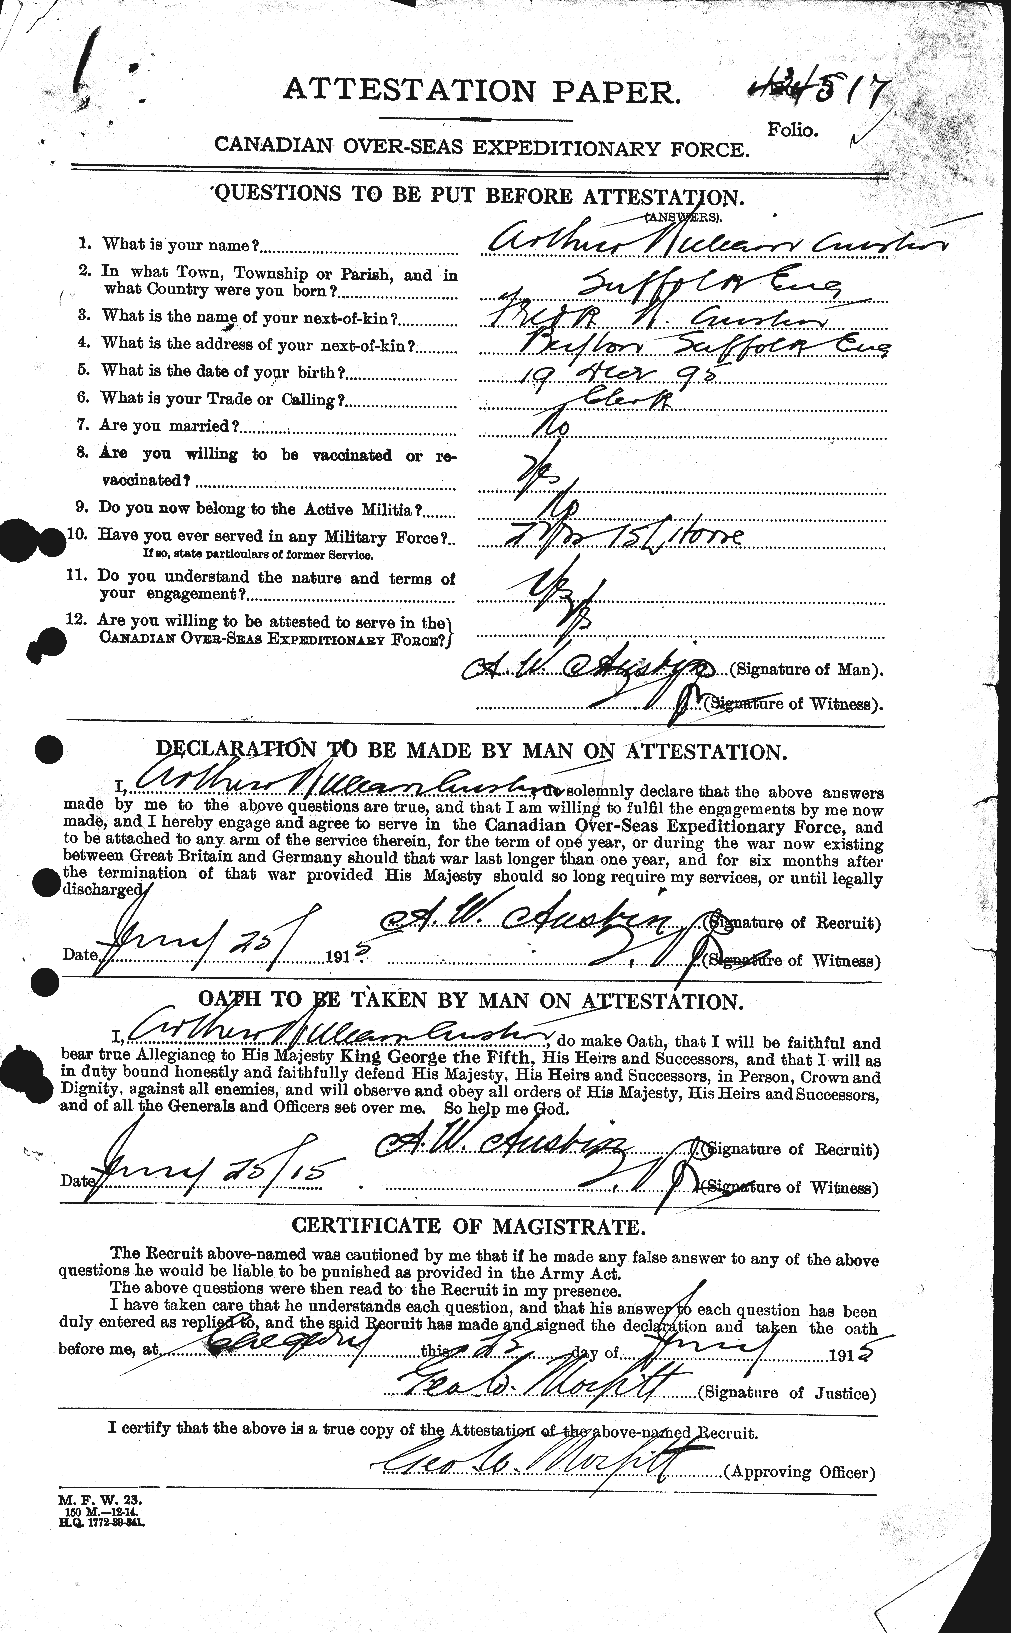 Personnel Records of the First World War - CEF 215453a